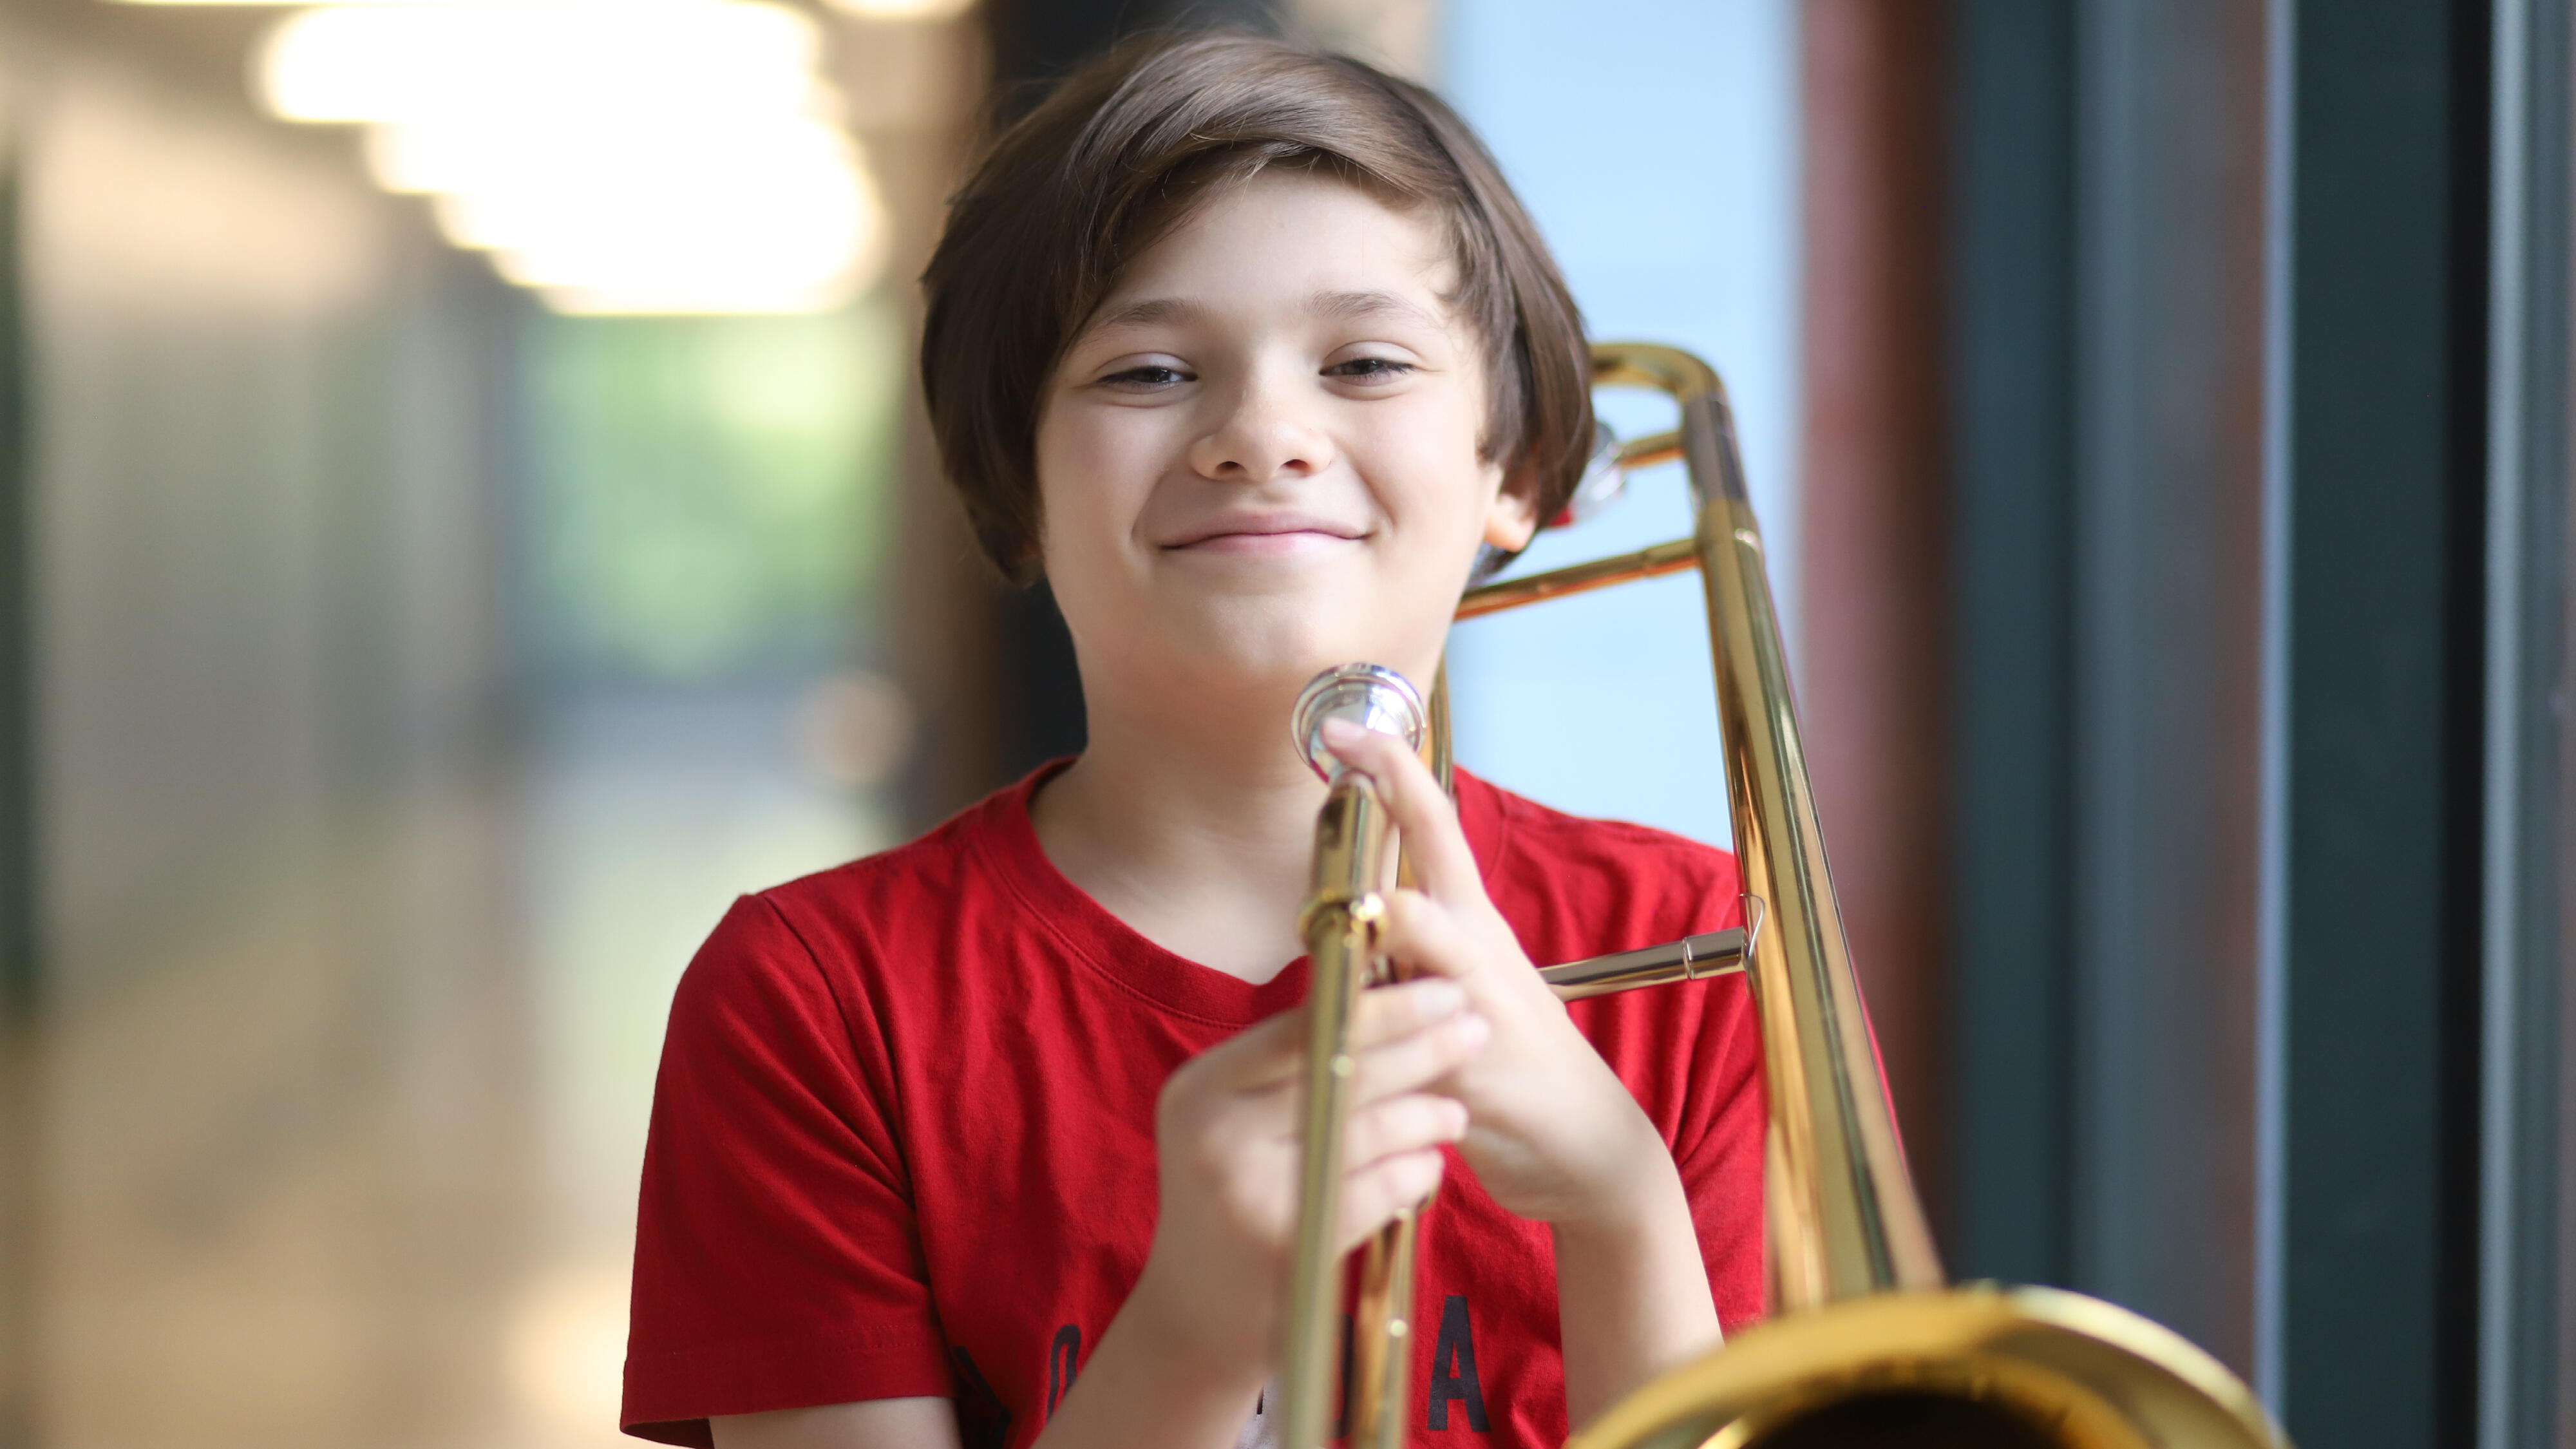 Student smiling while holding a trombone